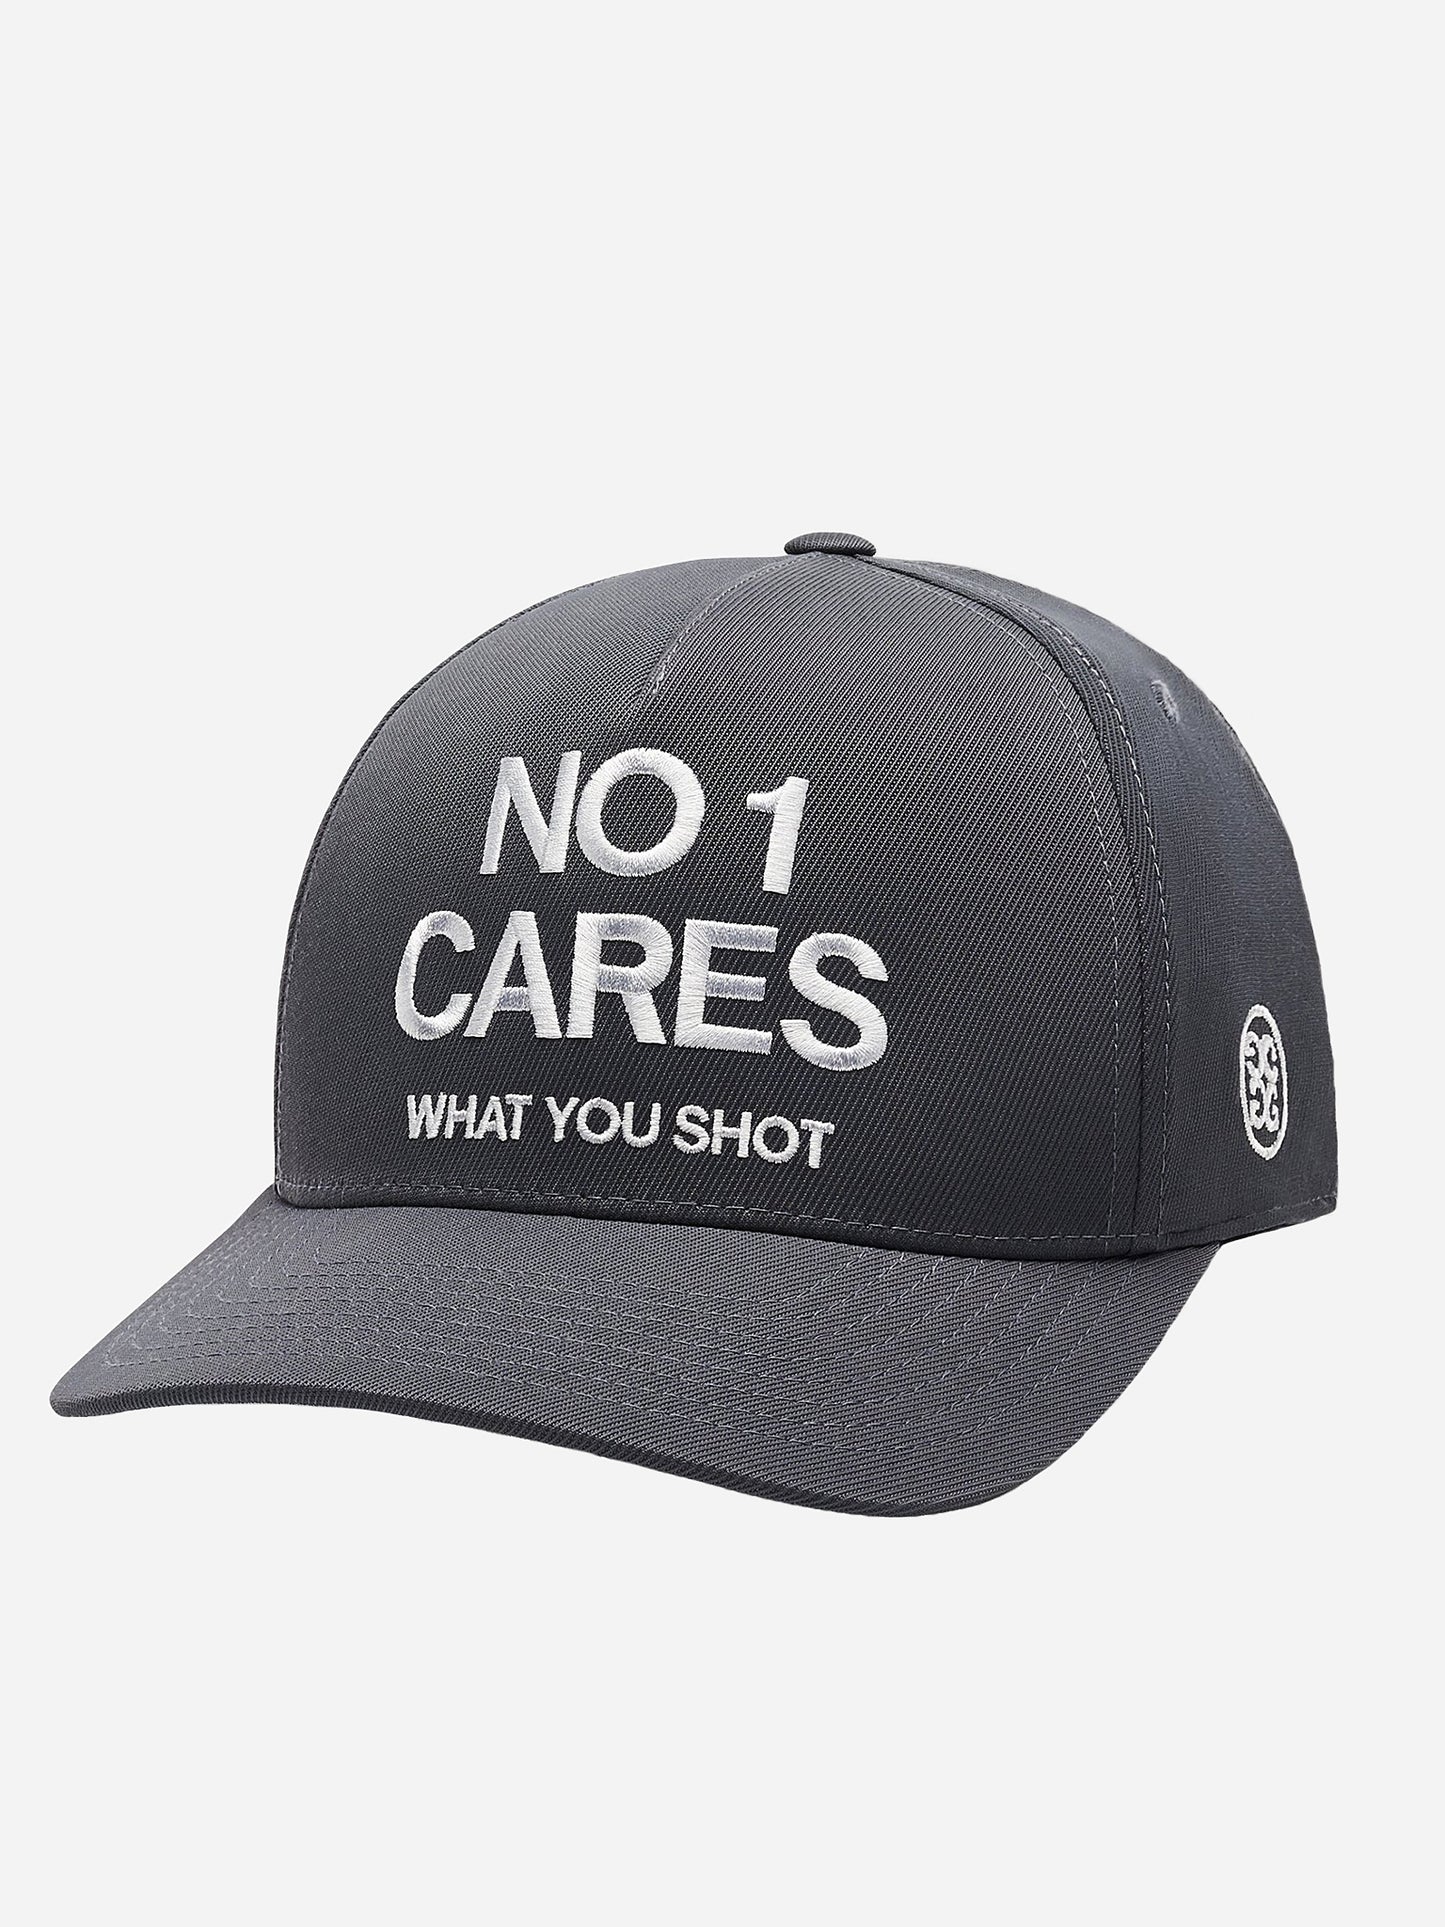 G/Fore Men's No 1 Cares Snapback Hat